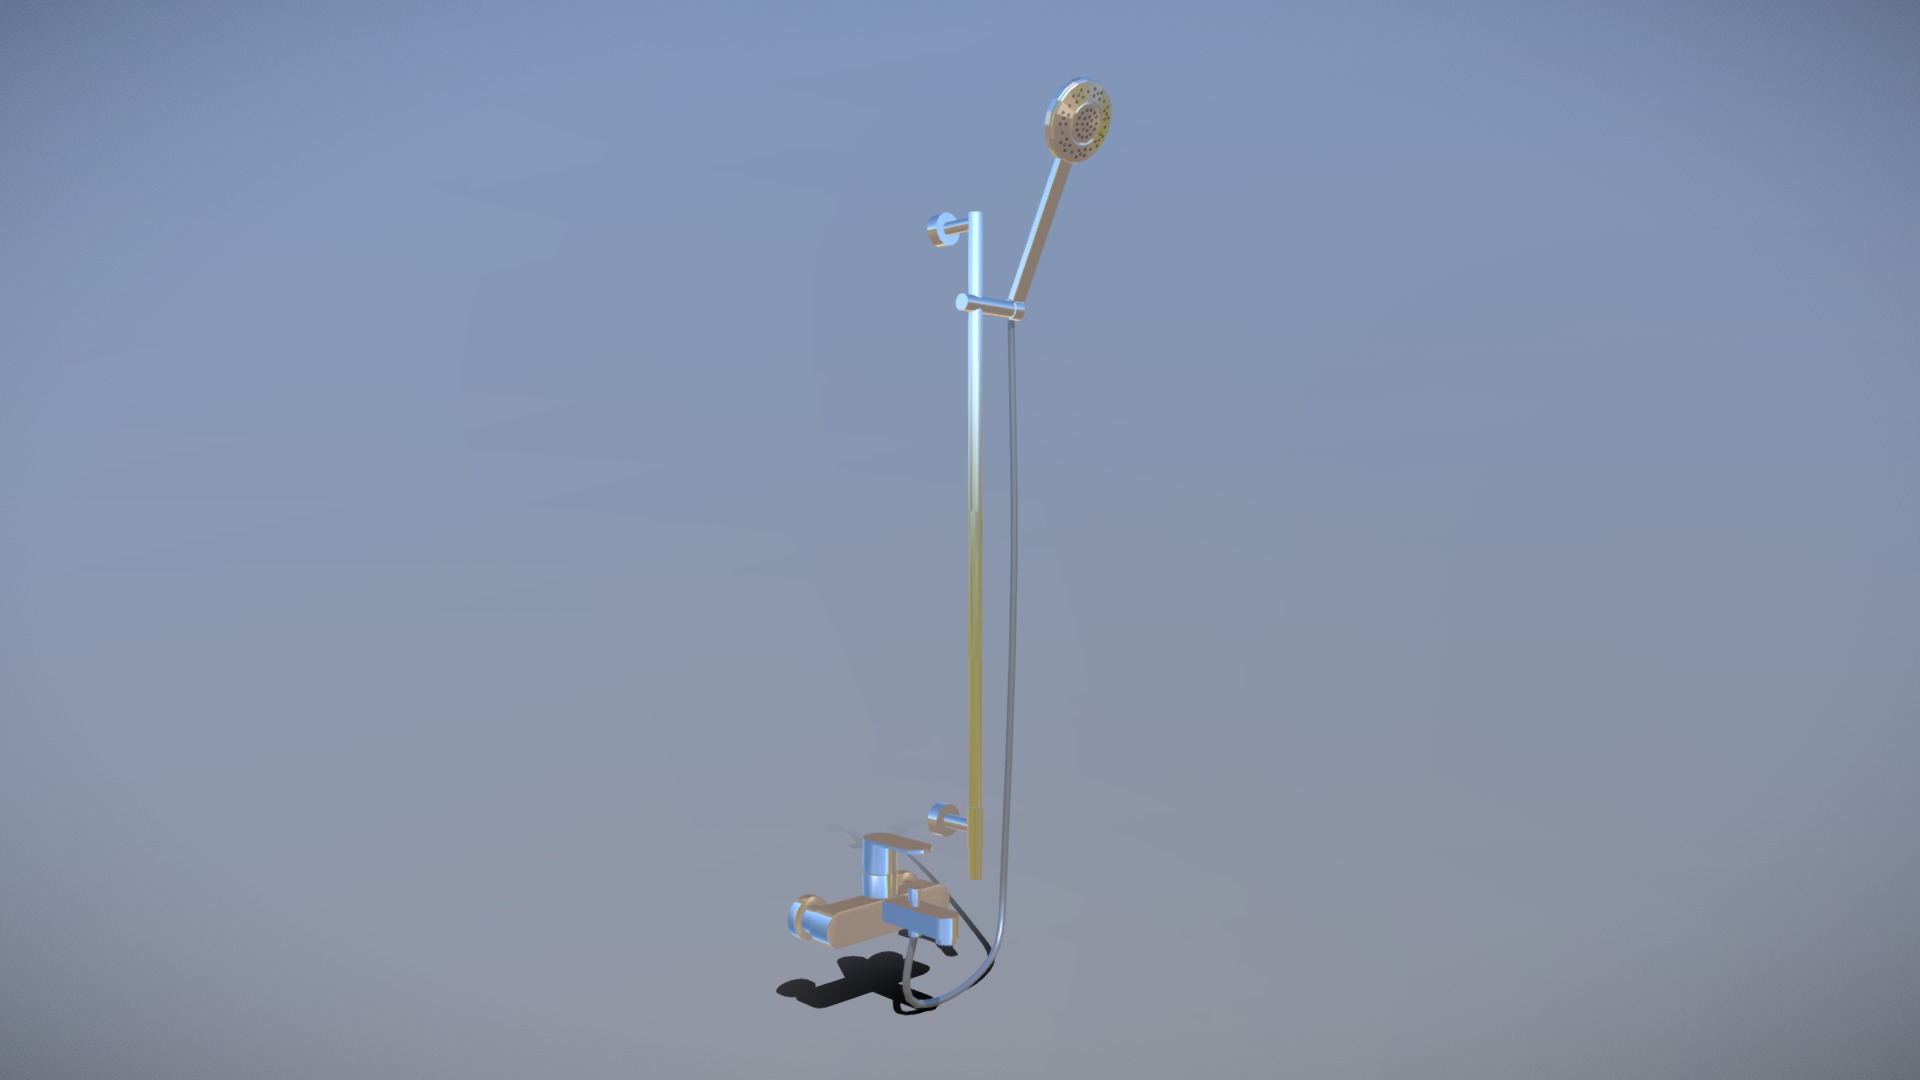 3D model wall shower faucet Low-poly - This is a 3D model of the wall shower faucet Low-poly. The 3D model is about a light pole with a person on it.